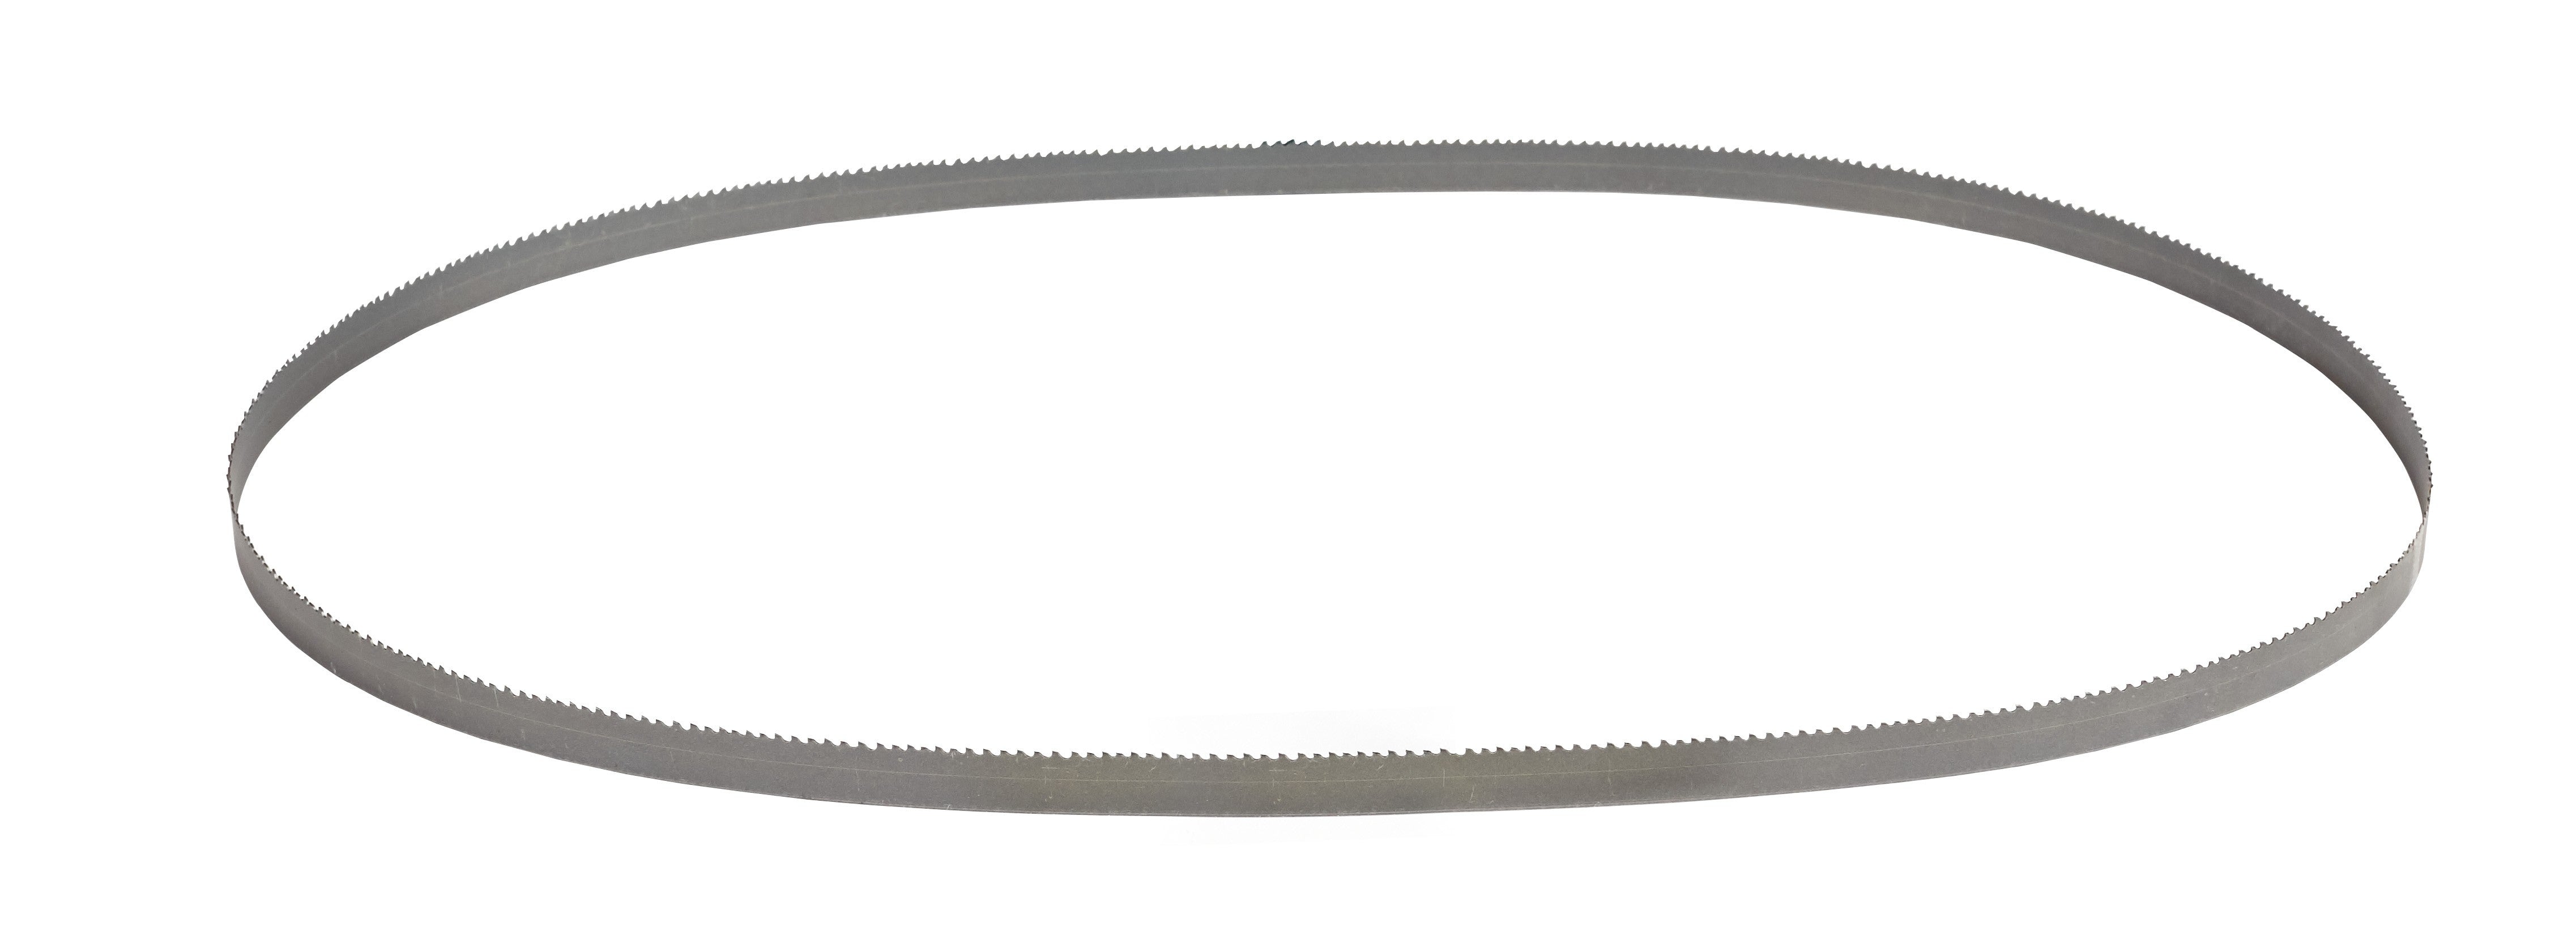 Milwaukee 48-39-0516 14TPI Compact Band Saw Blades 25-Pack